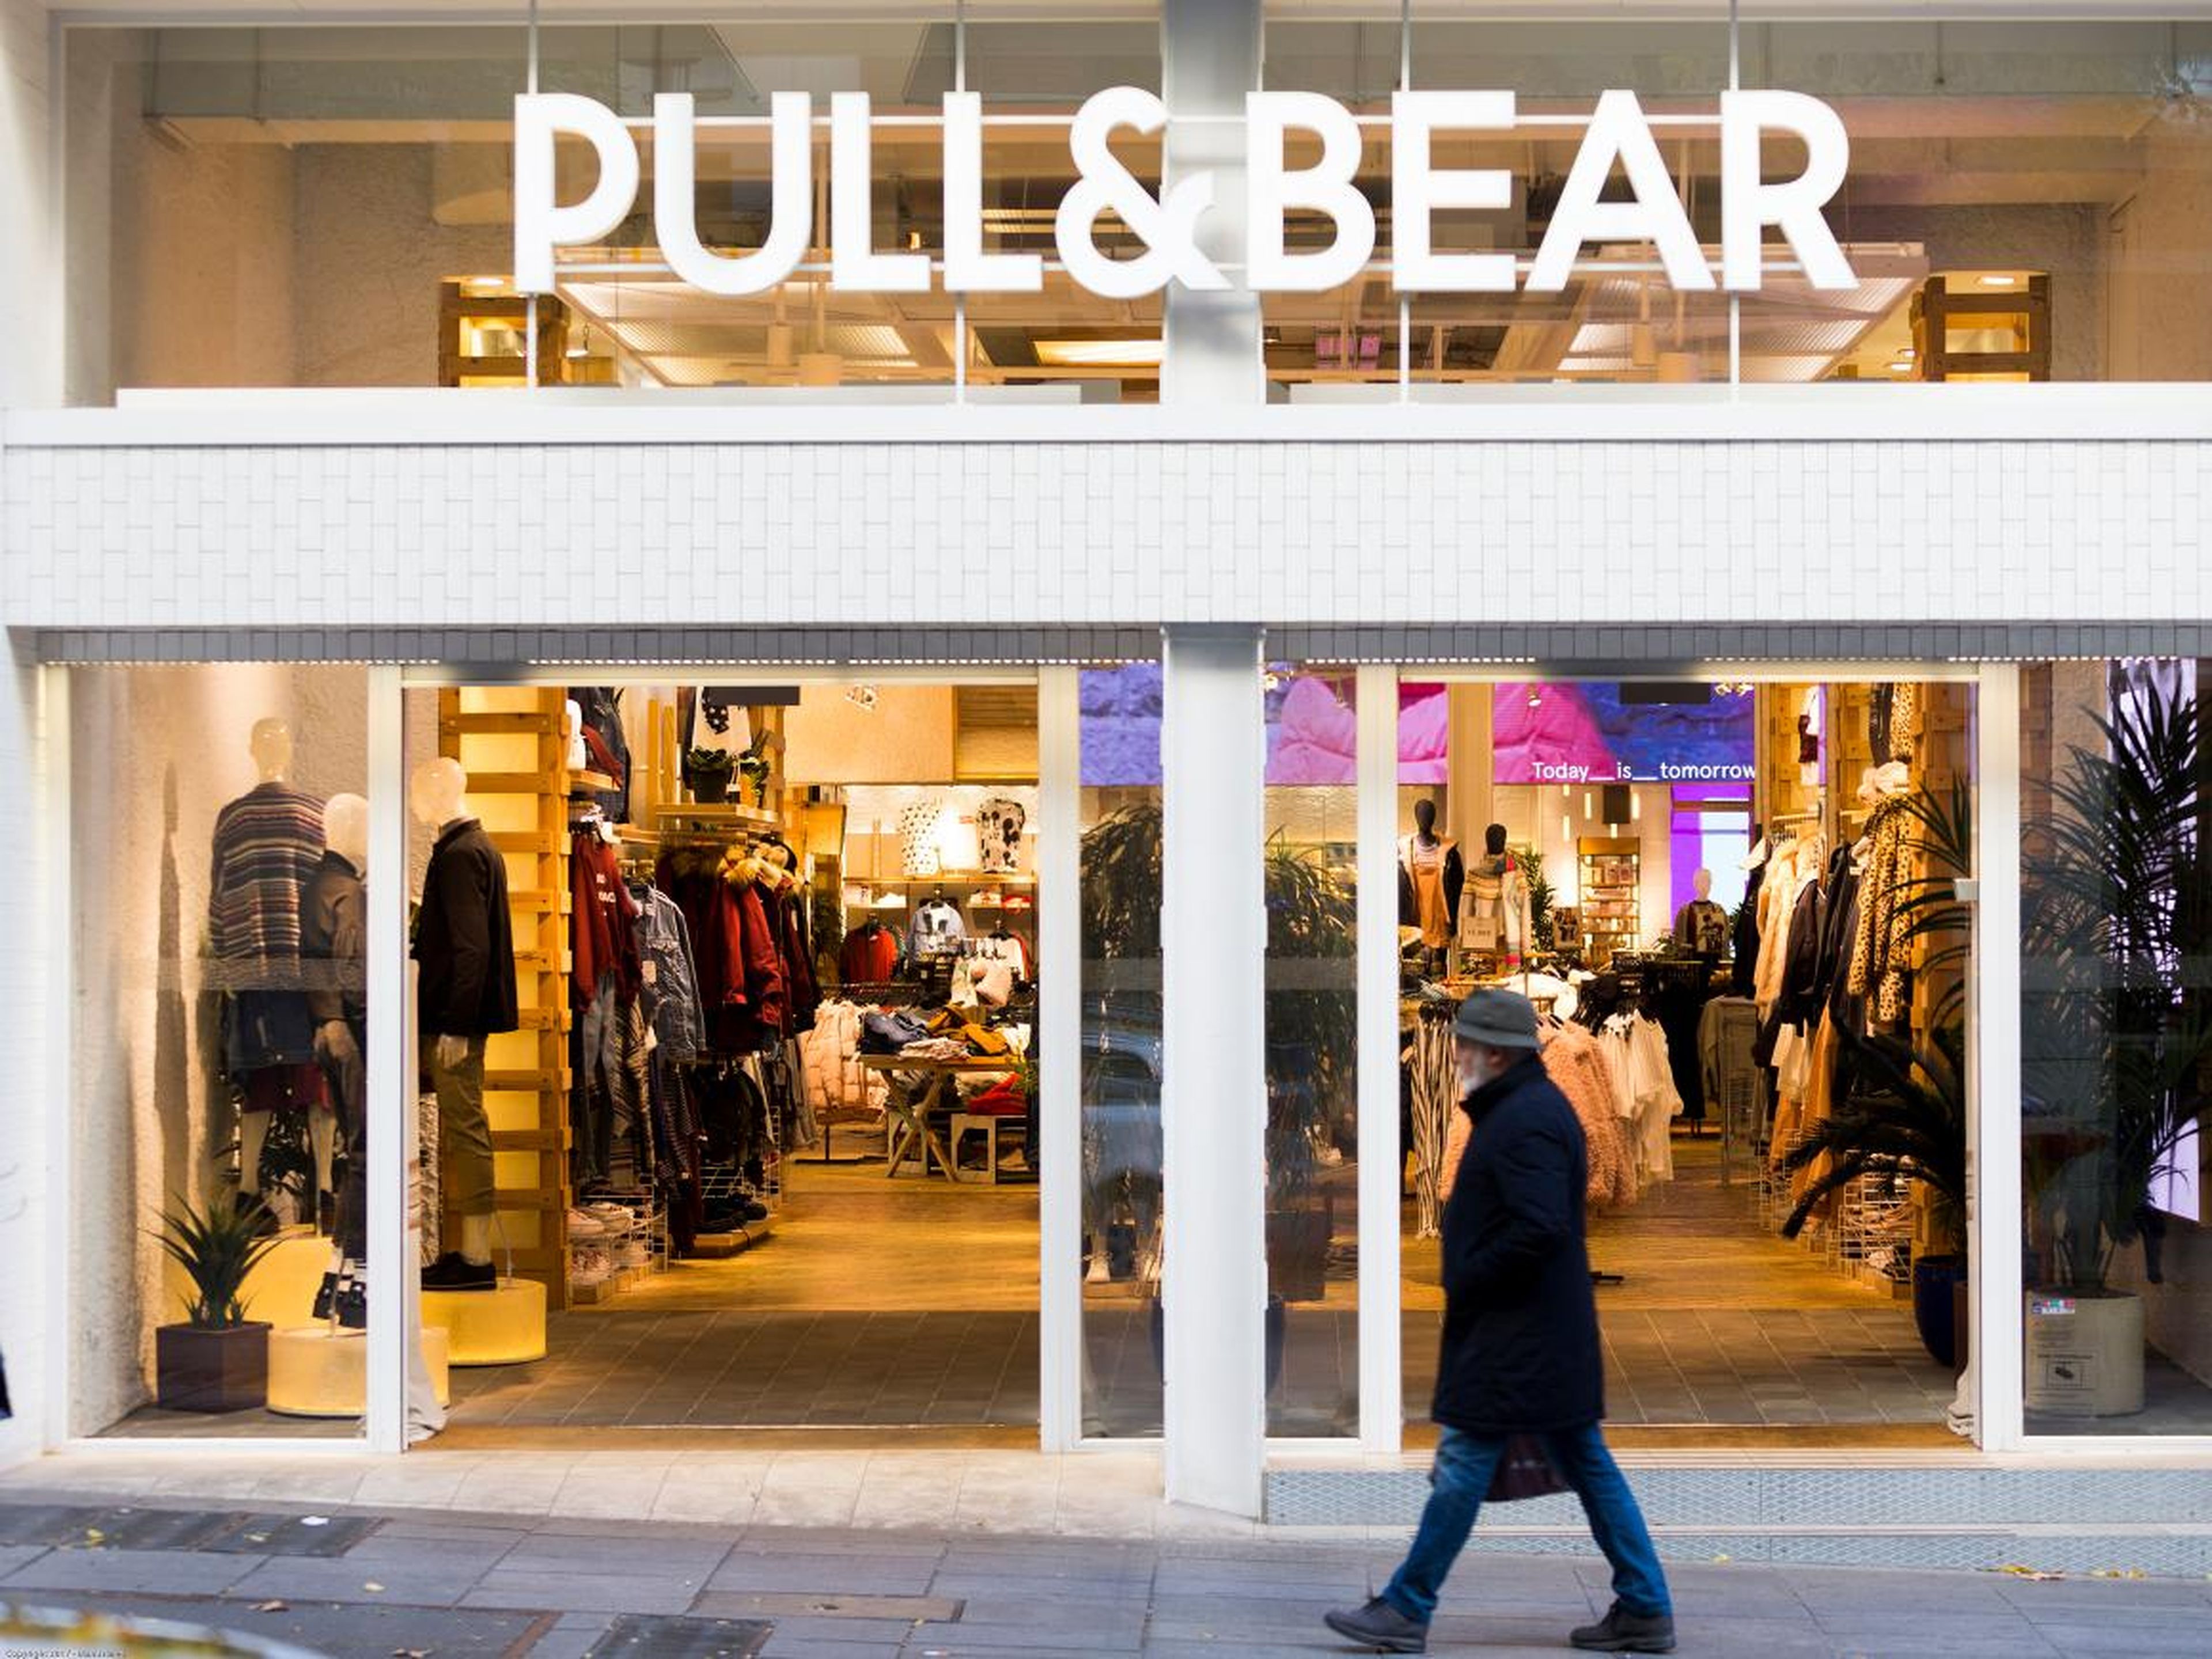 ... Pull&Bear, a teen-focused retailer with 970 stores in 76 markets around Europe, the Middle East, Africa, Asia, and South America ...